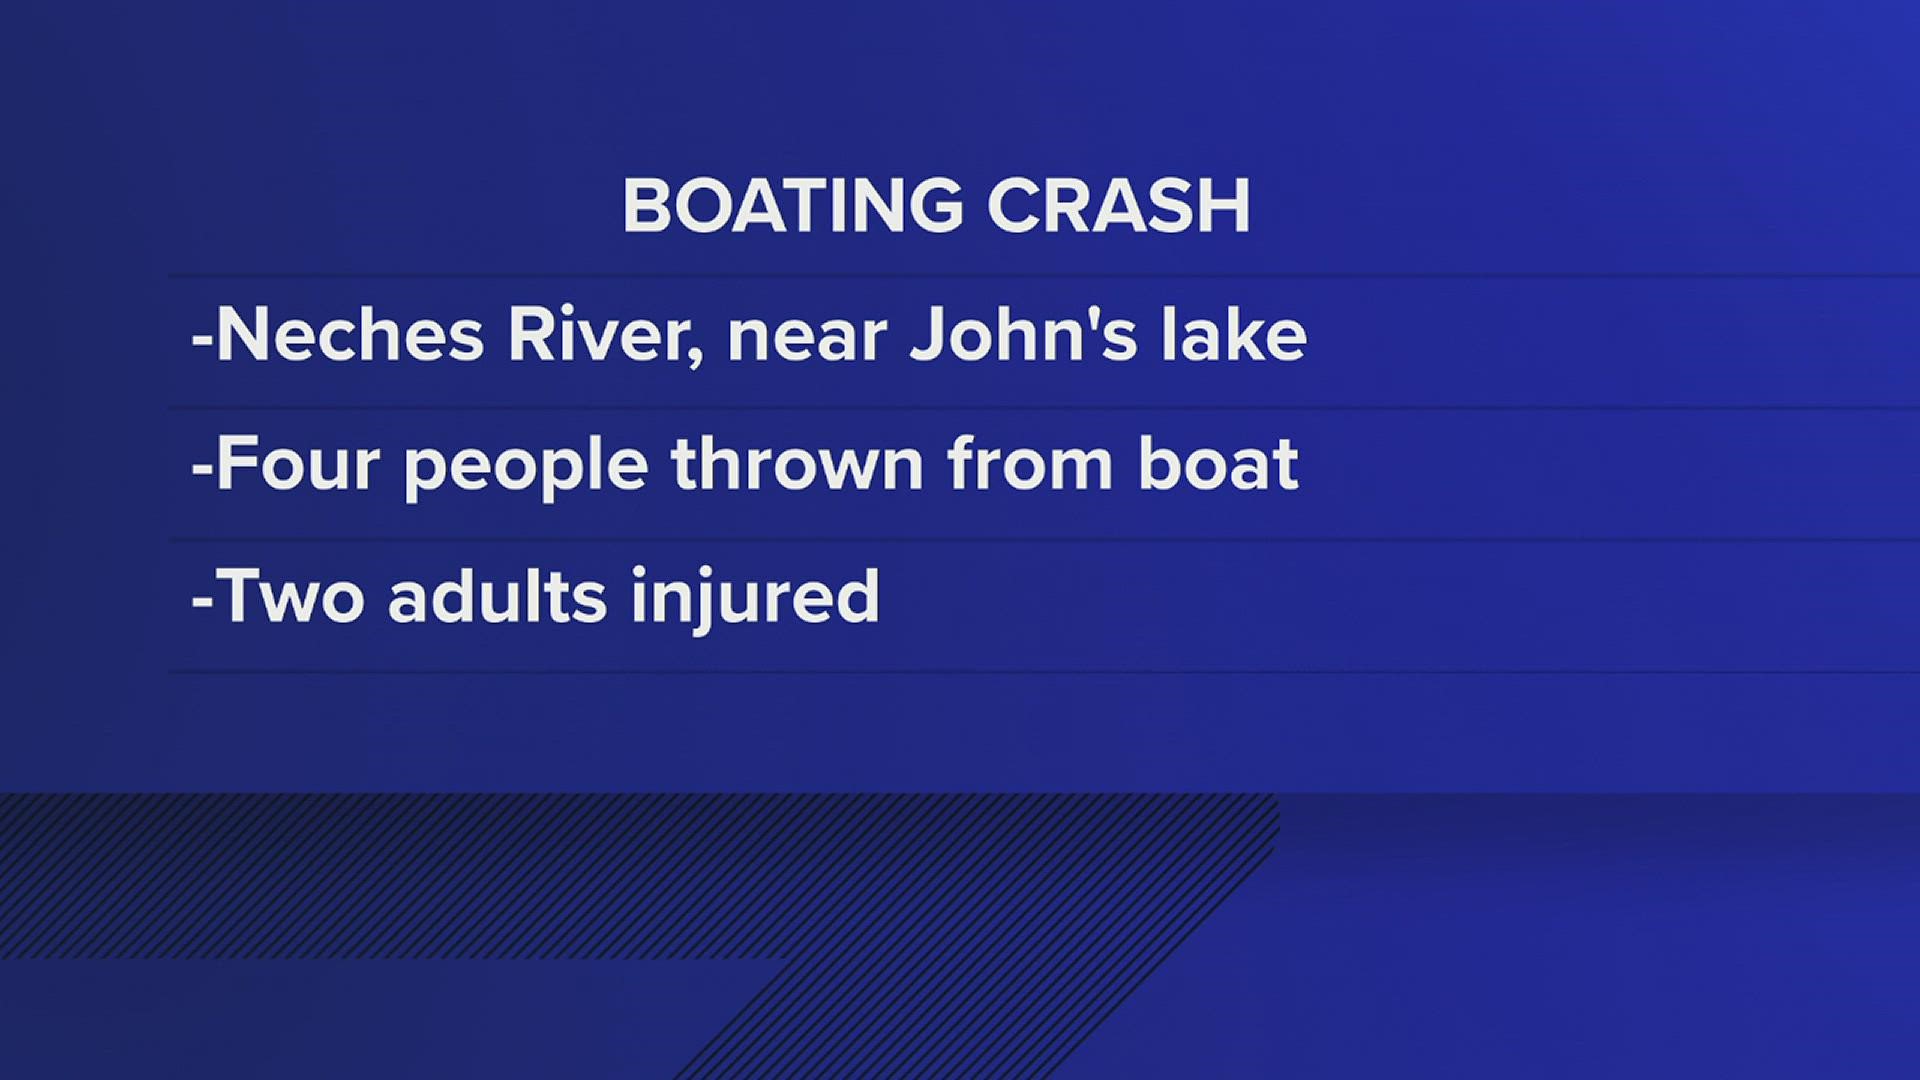 Four people were on the boat.